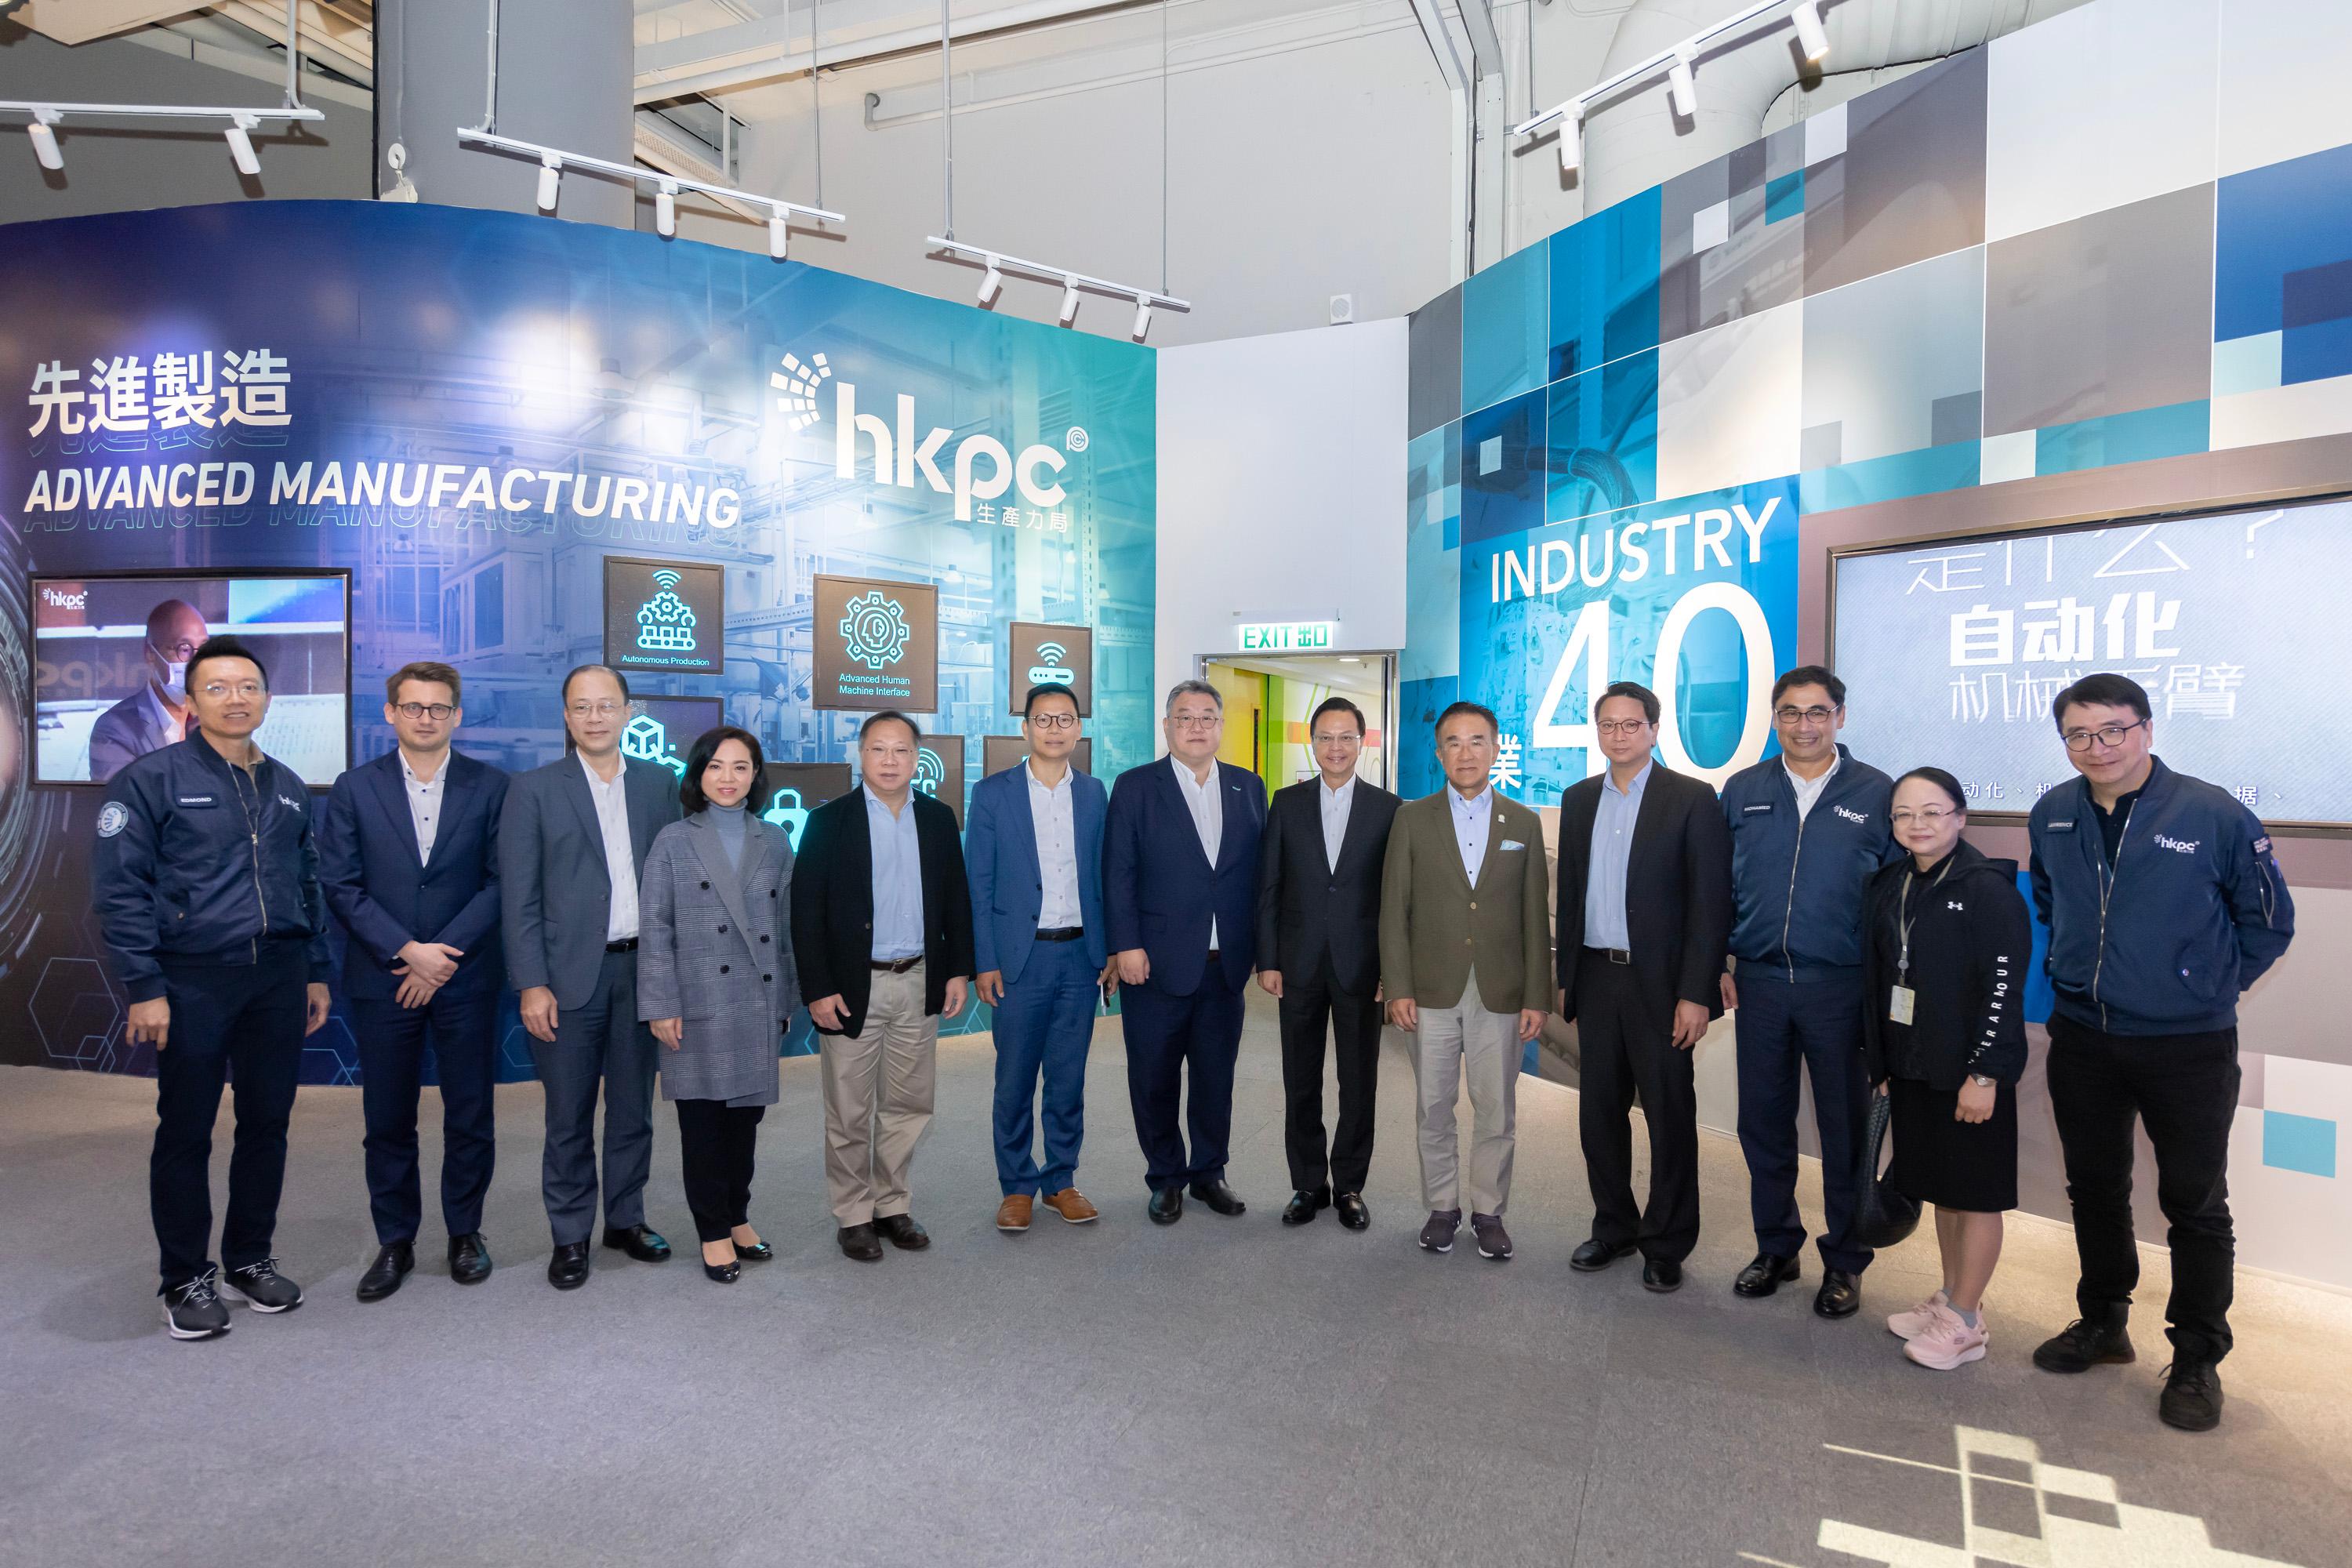 The Legislative Council (LegCo) Panel on Transport today (March 28) visited Hong Kong Productivity Council (HKPC).   Photo shows LegCo Members posing for a group photo with representatives of HKPC at the exhibition hall of New Industrialisation in HKPC Building.